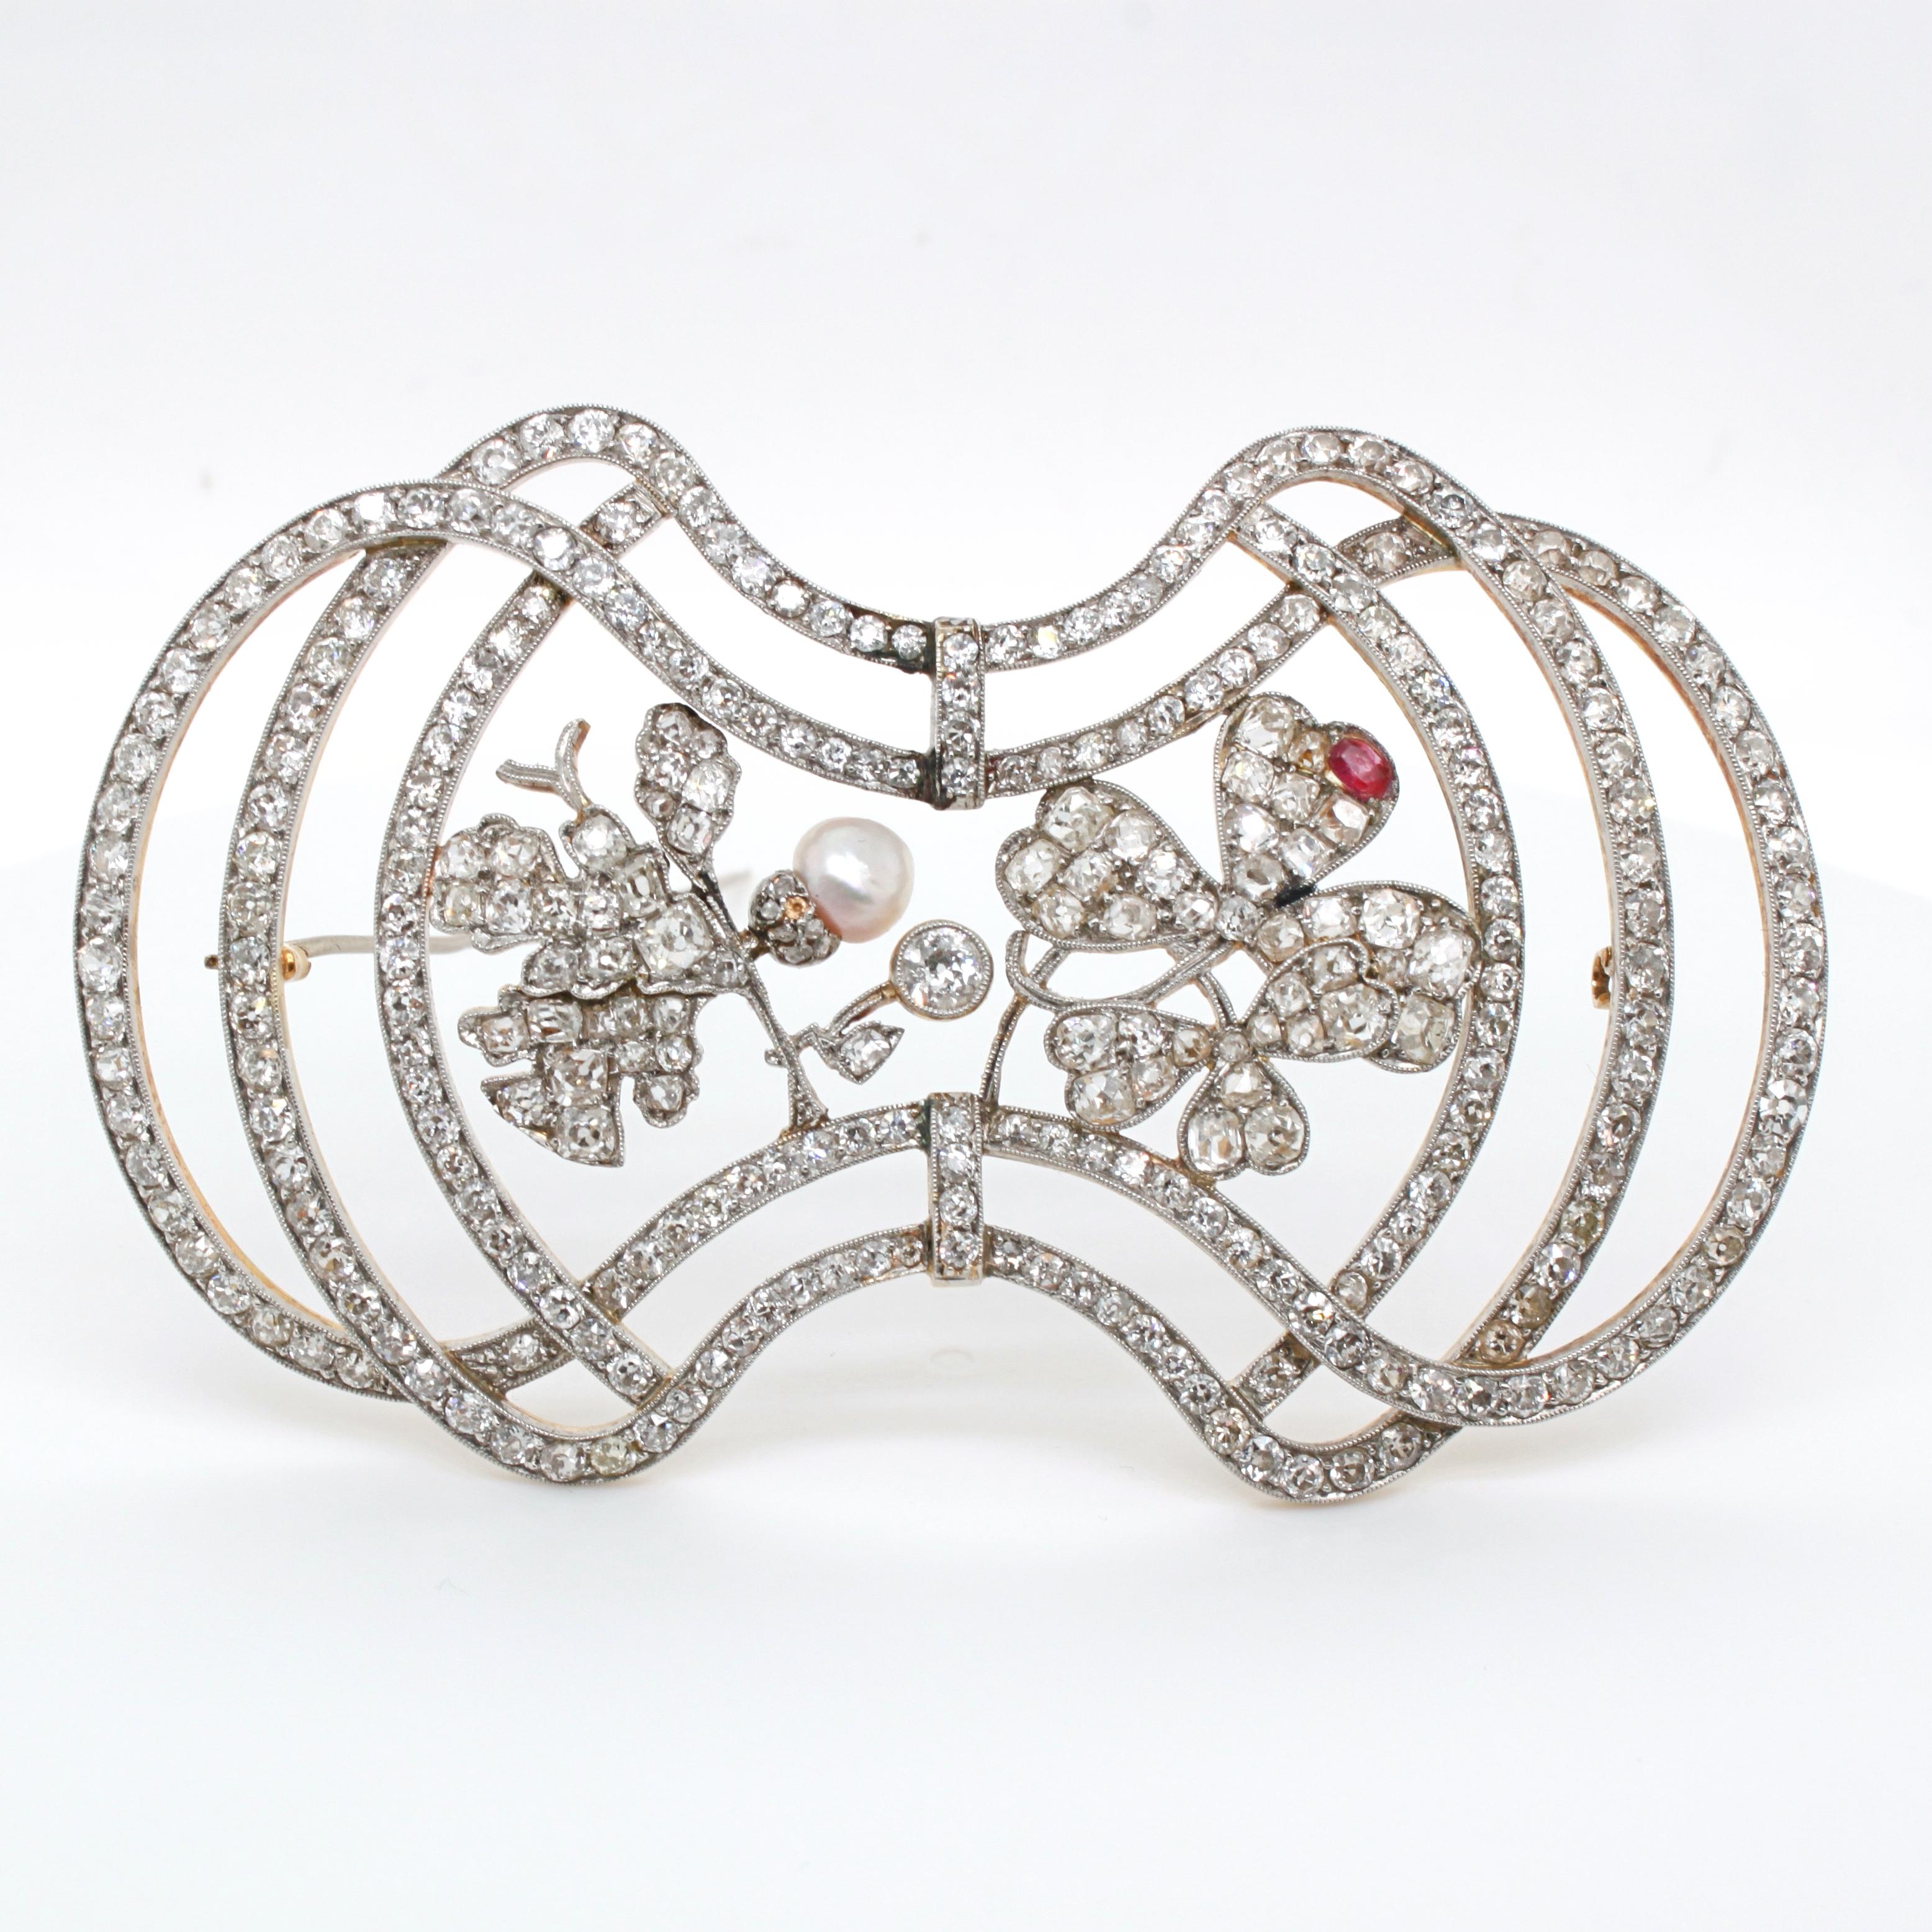 Diamond Pearl and Ruby Oak Leaf and Trefoil Clover Brooch, Art Nouveau, ca 1910s For Sale 1